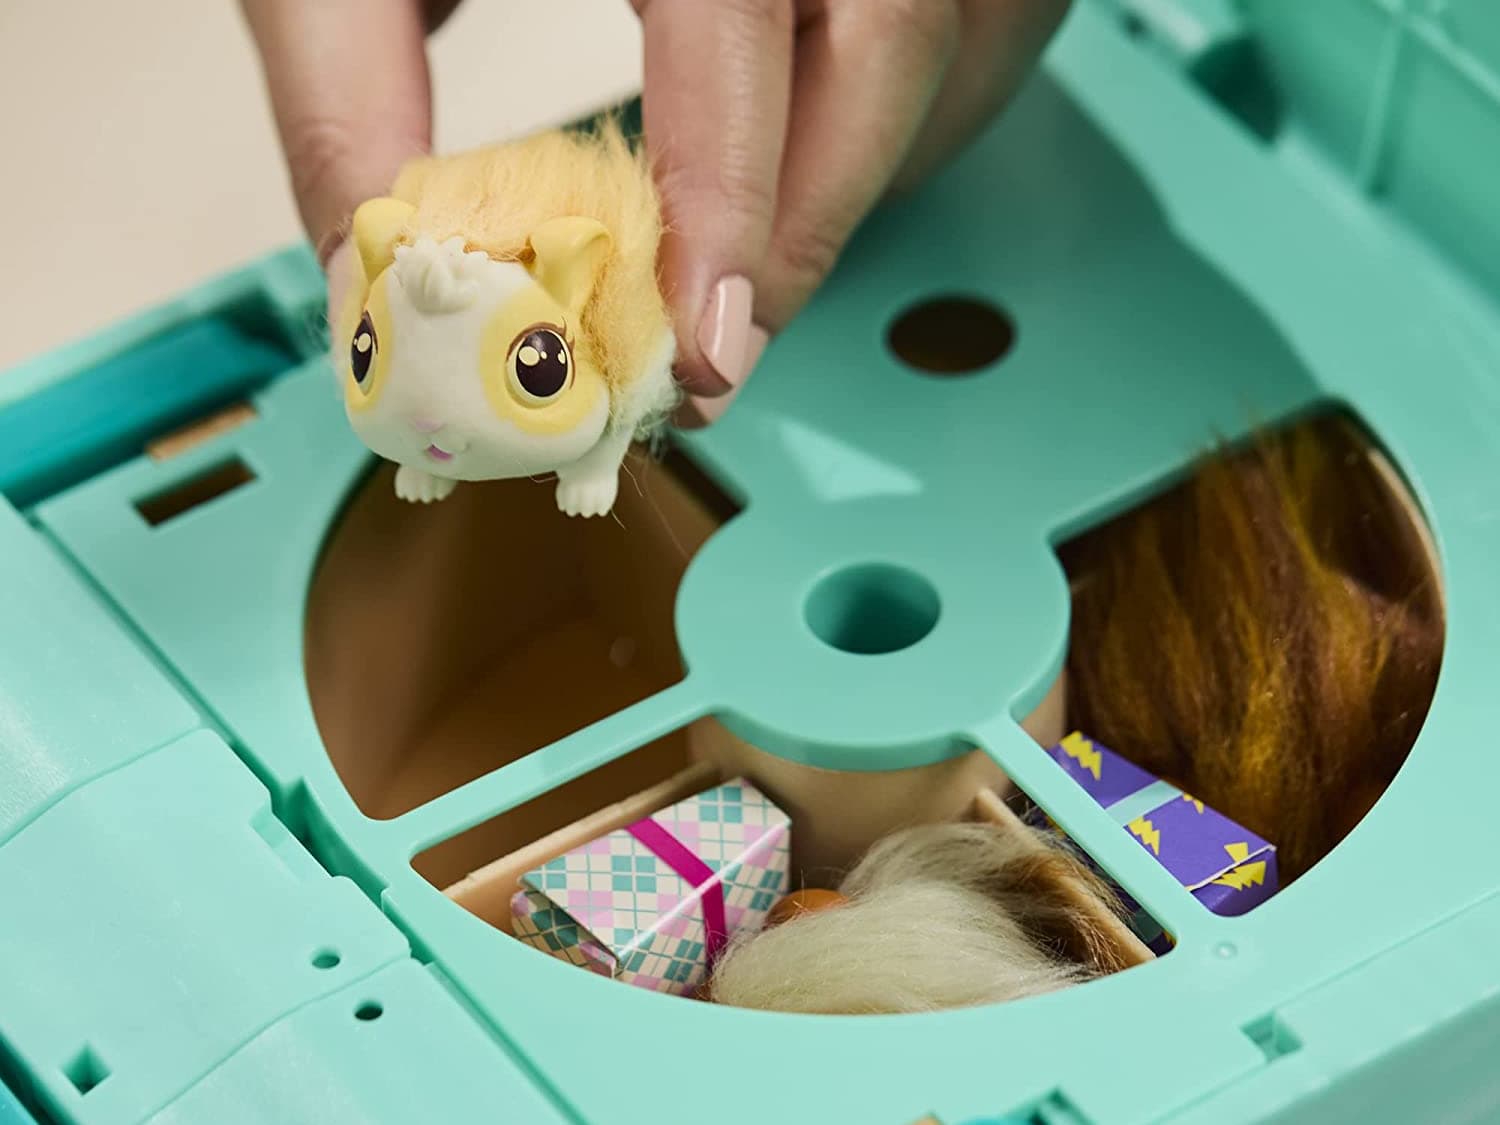 This Interactive Guinea Pig Delivers 3 Adorable Pet Babies - The Toy Insider